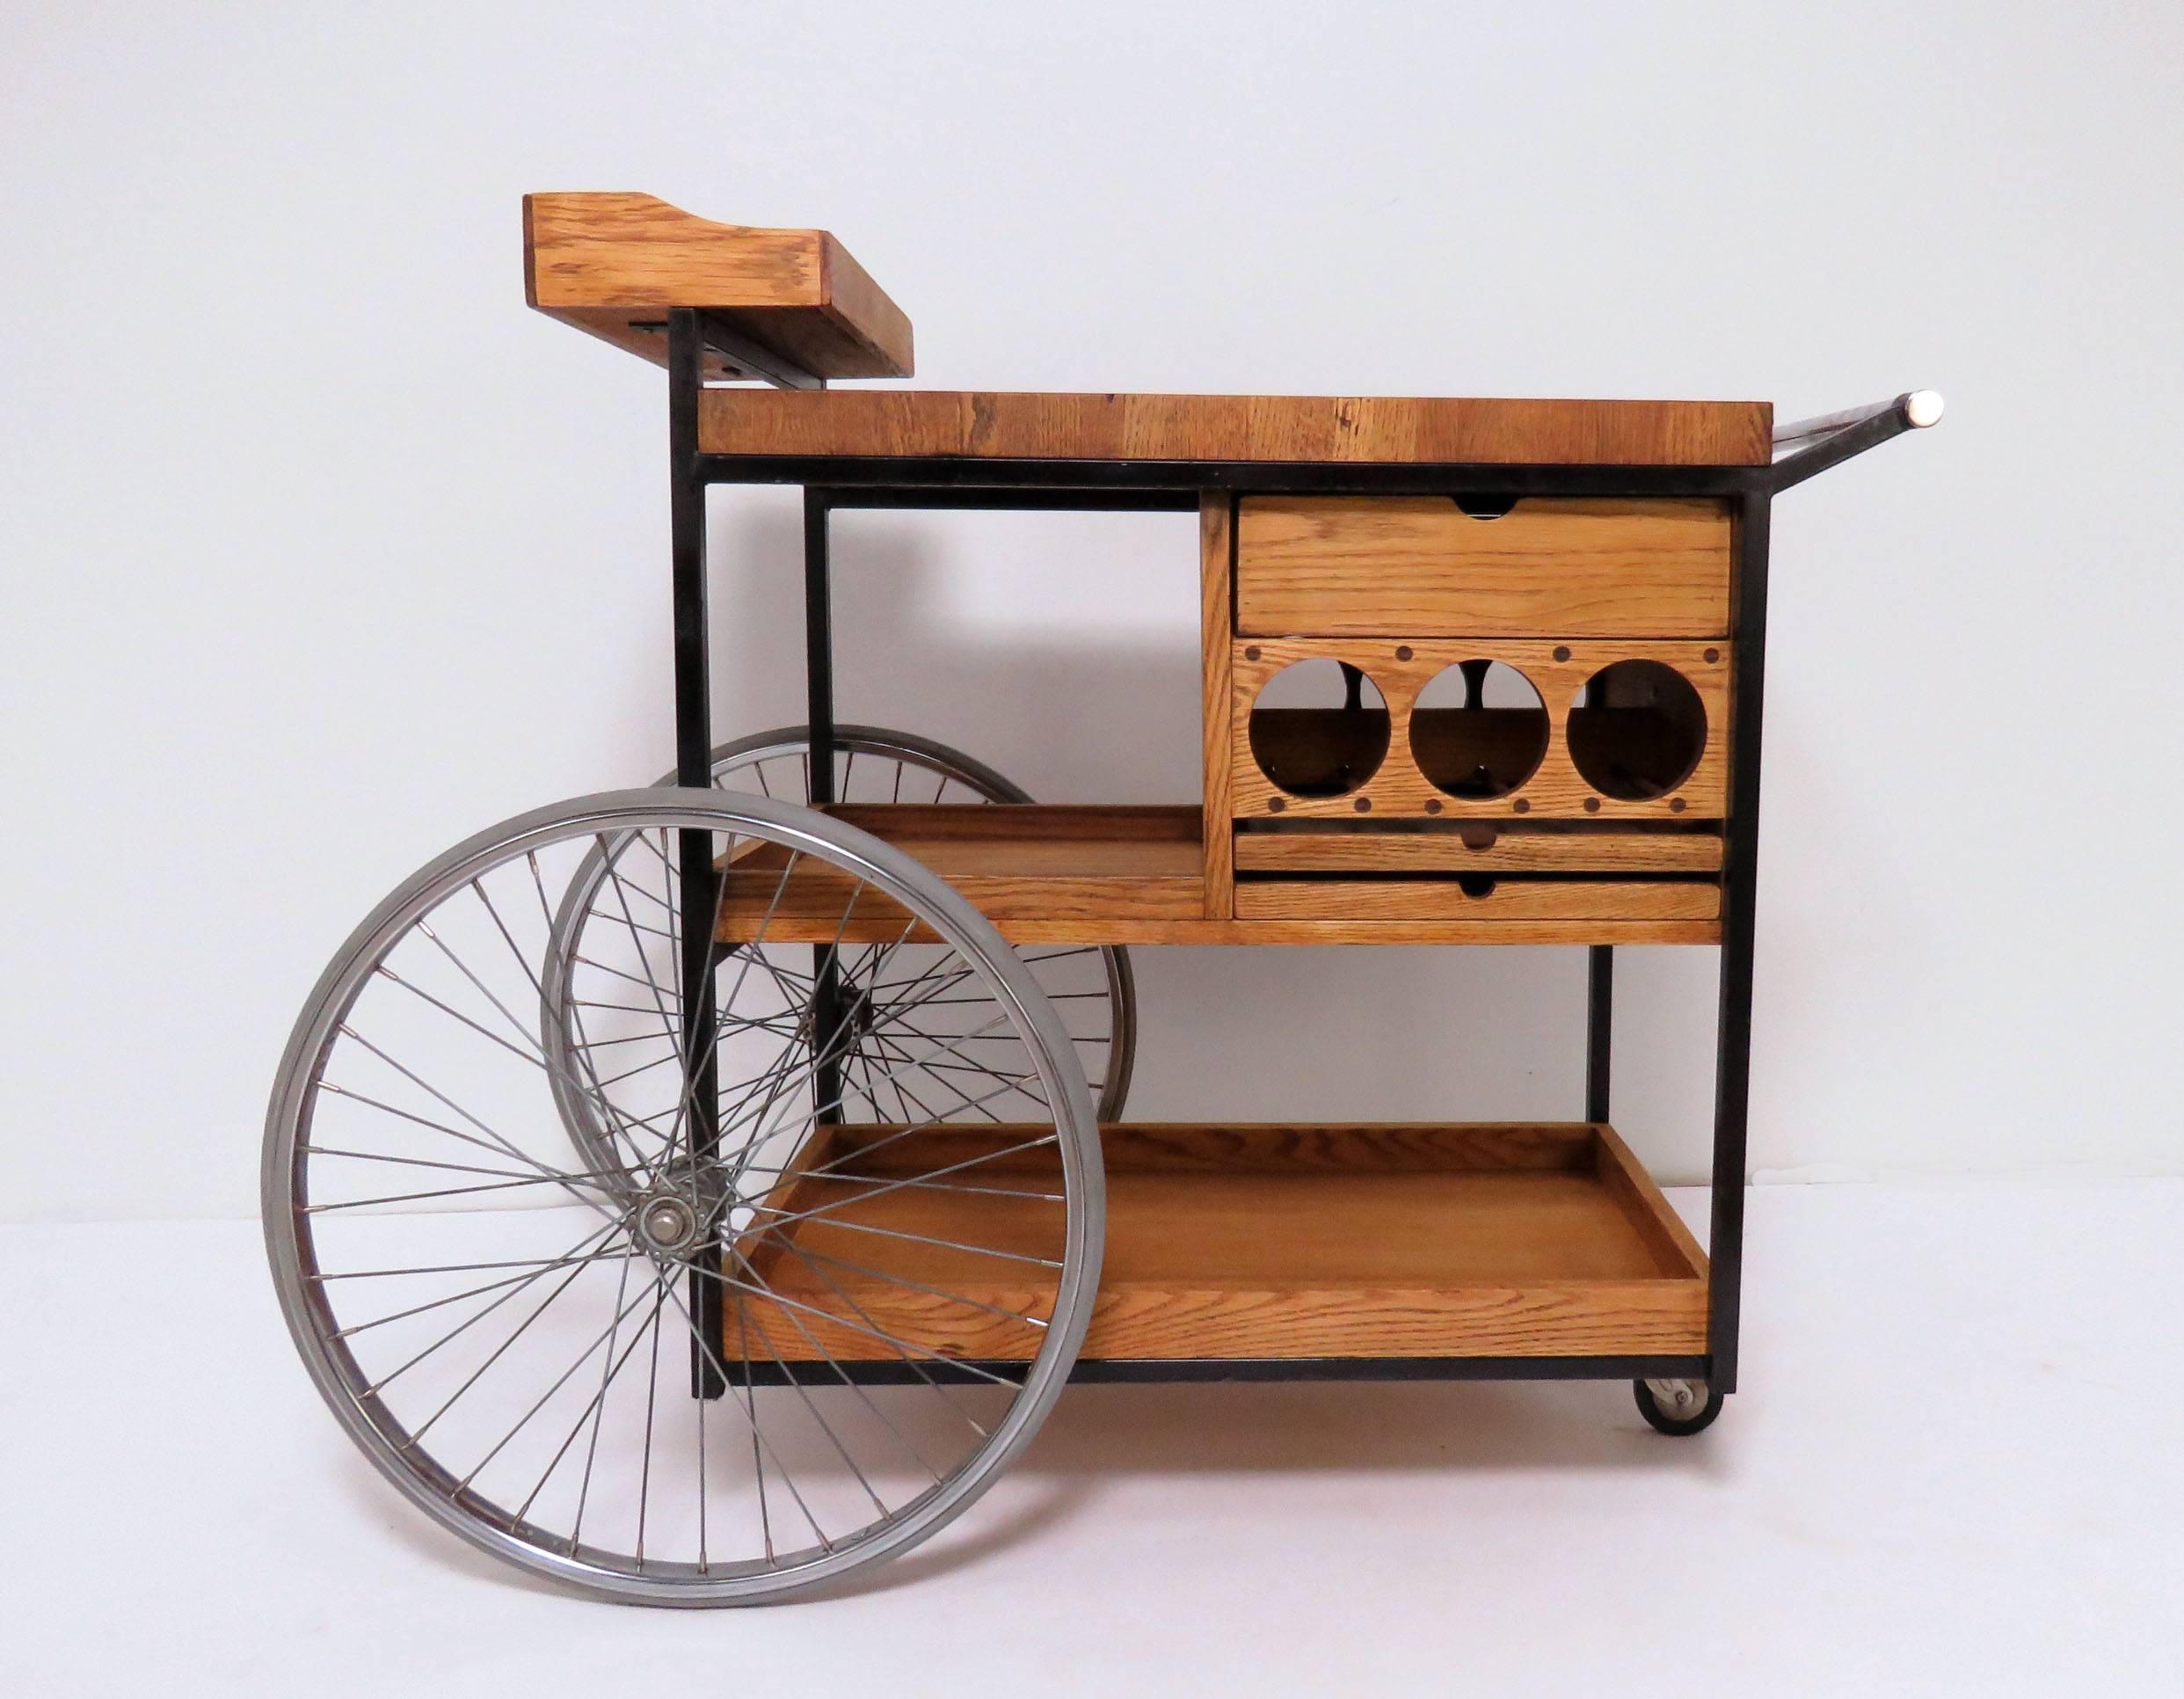 Bar cart or barbecue trolley, designed by Arthur Umanoff for David Morgan ca. late 1960s - early 1970s. Includes staved teak work surface for carving of meat, wine bottle storage, a deep drawer and two shallow drawers, and other storage areas. 